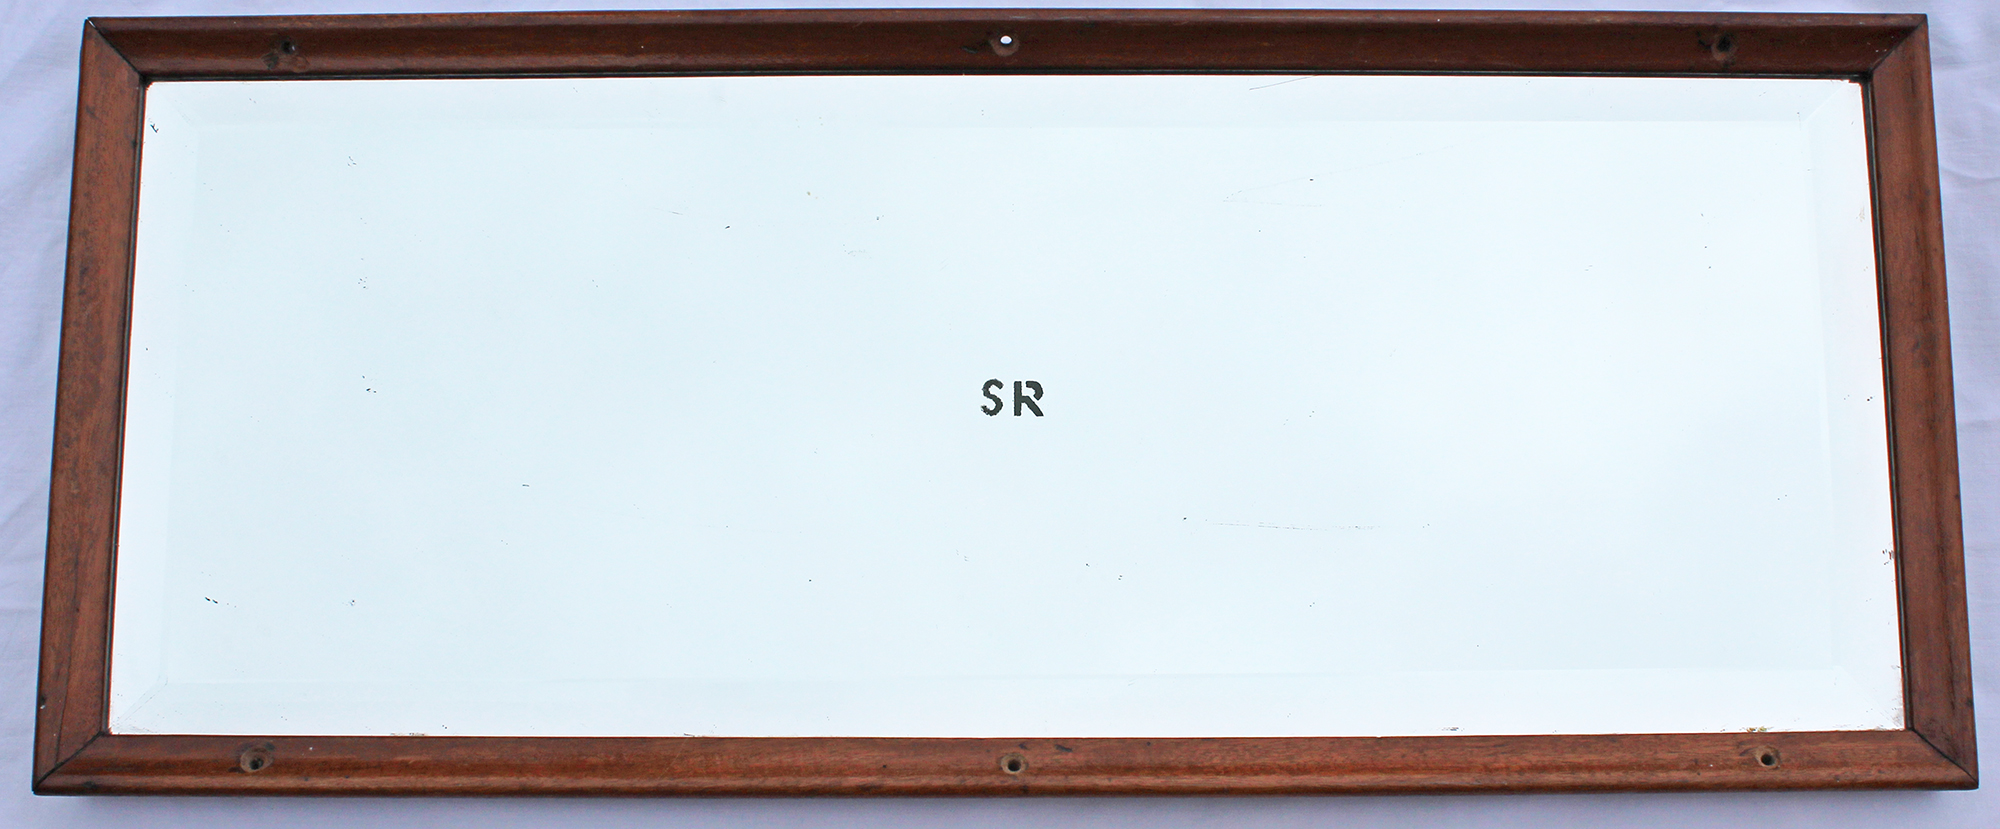 Southern Railway Carriage Mirror in original frame measuring 27in x 11.25in. Stylish bevelled edge